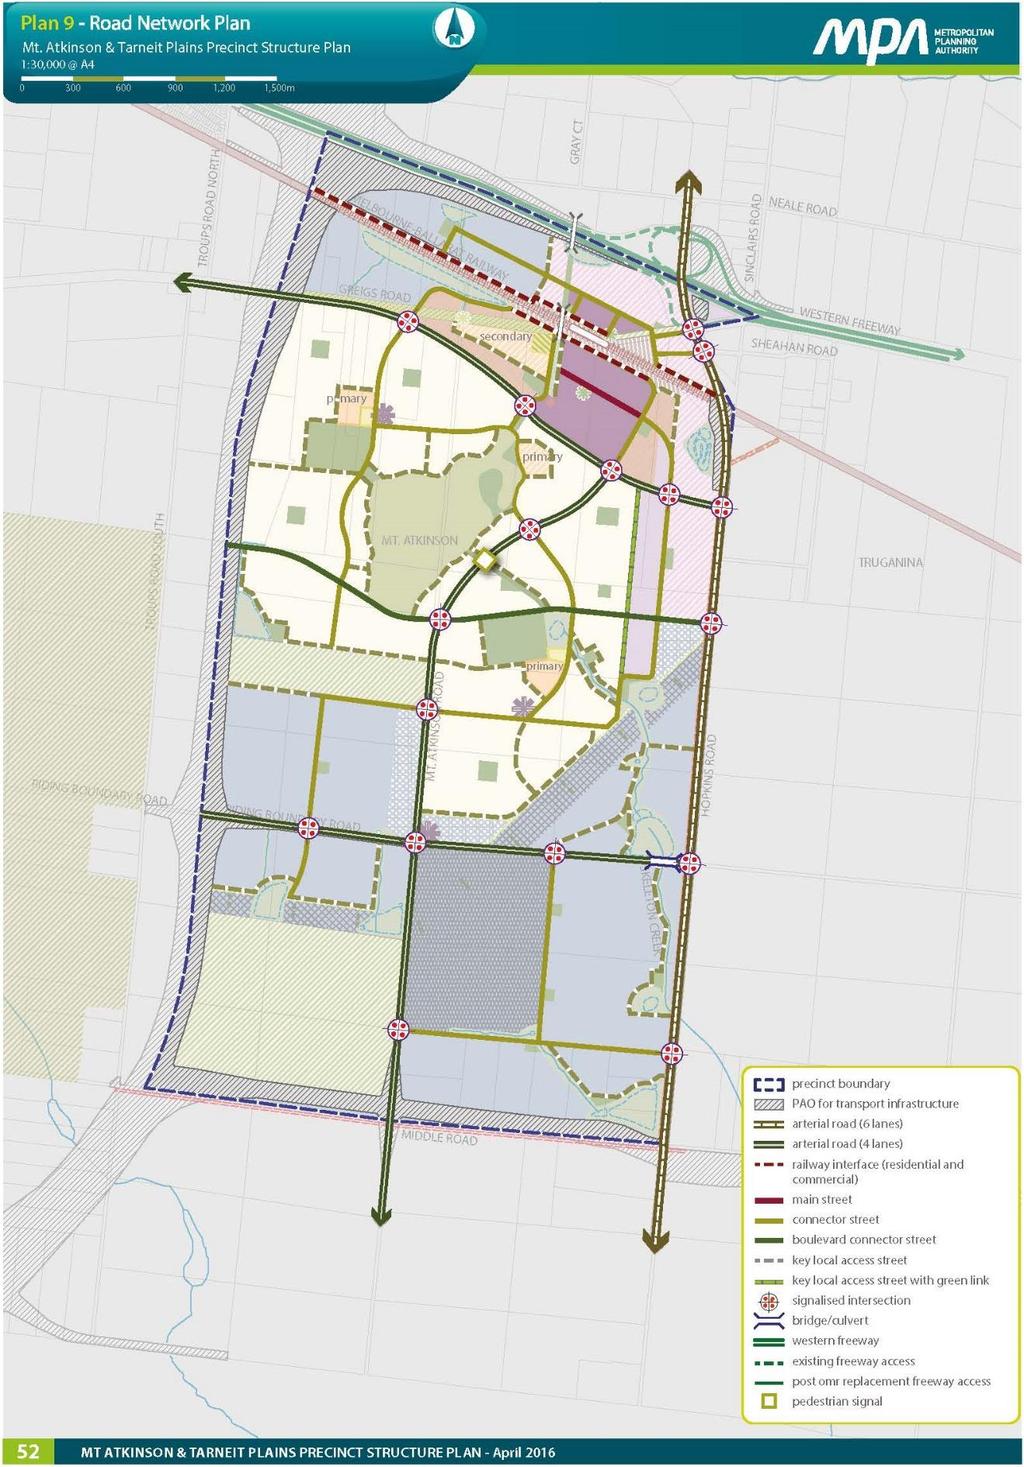 Figure 10: Proposed Road Network Plan (extract from Mt